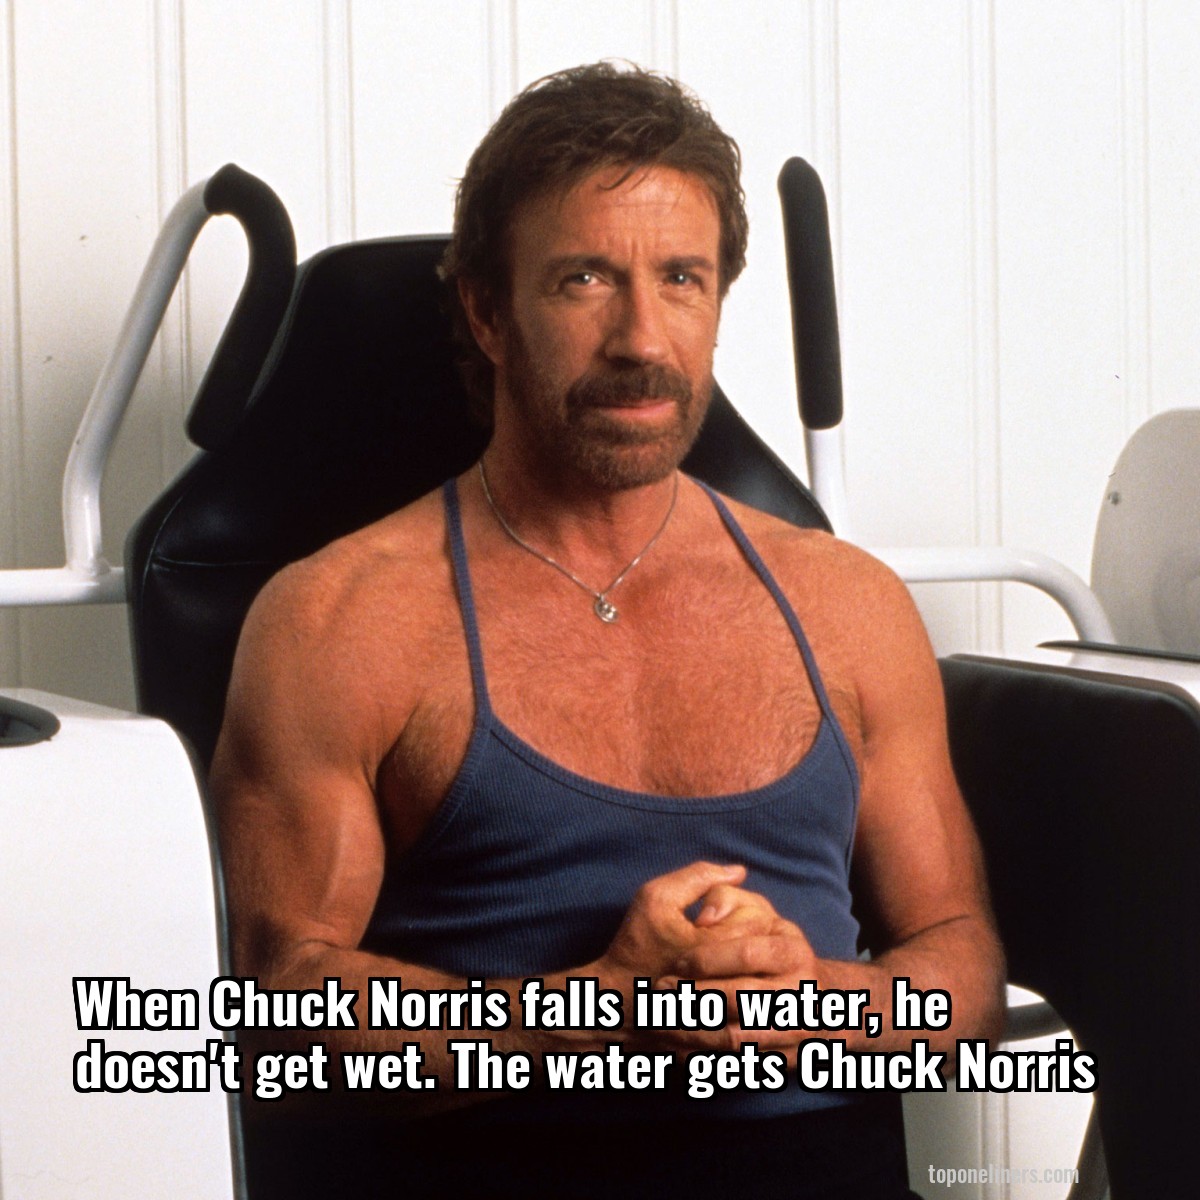 When Chuck Norris falls into water, he doesn't get wet. The water gets Chuck Norris